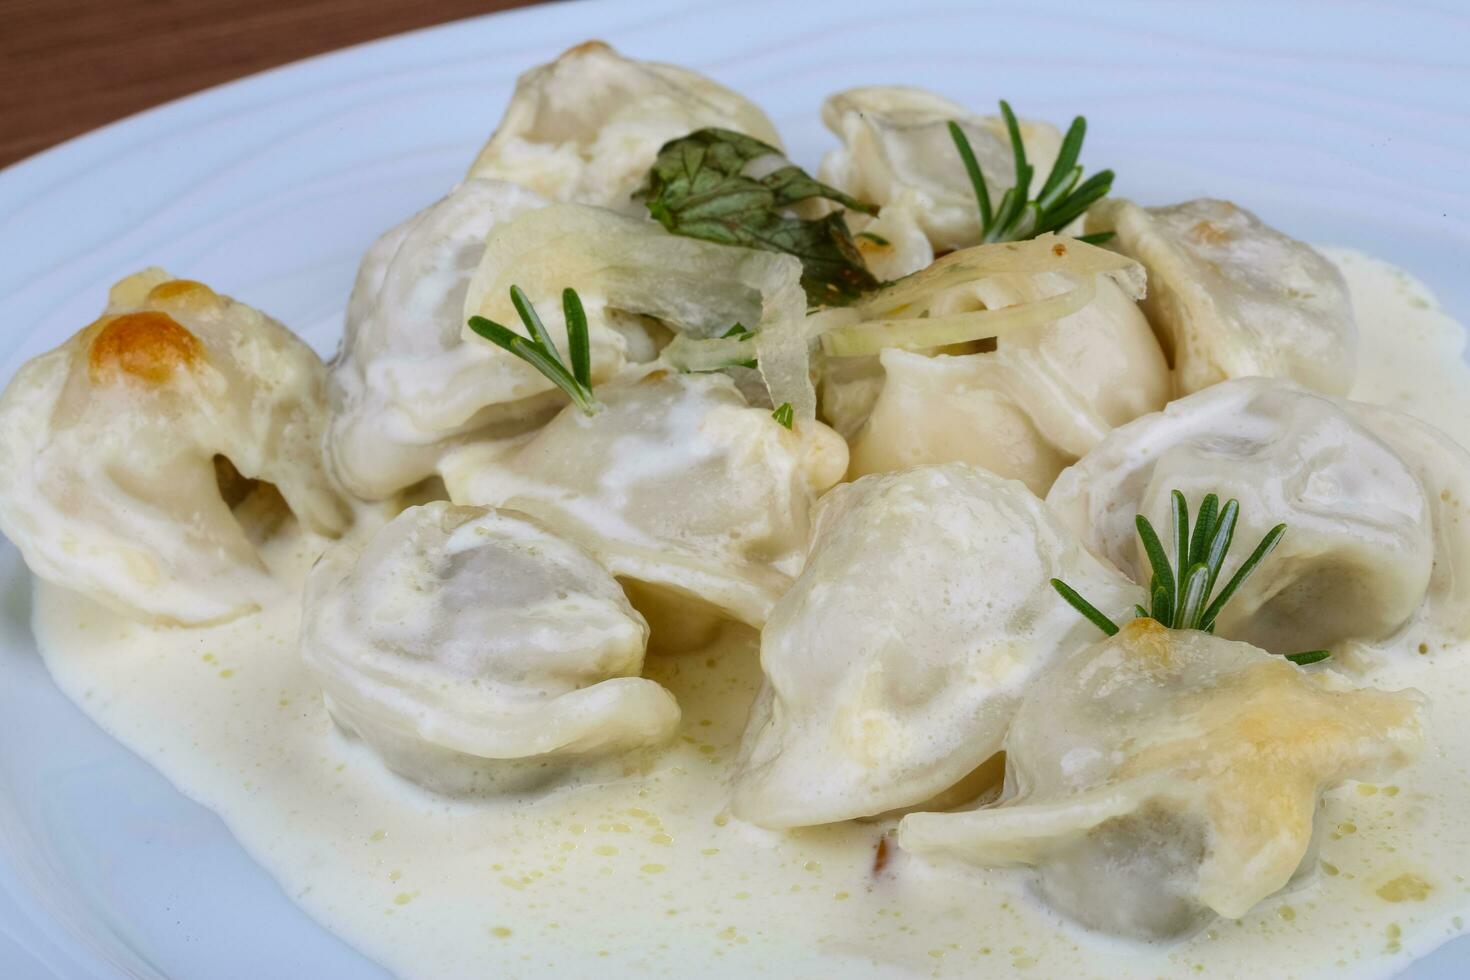 Russian dumplings on the plate close up view photo